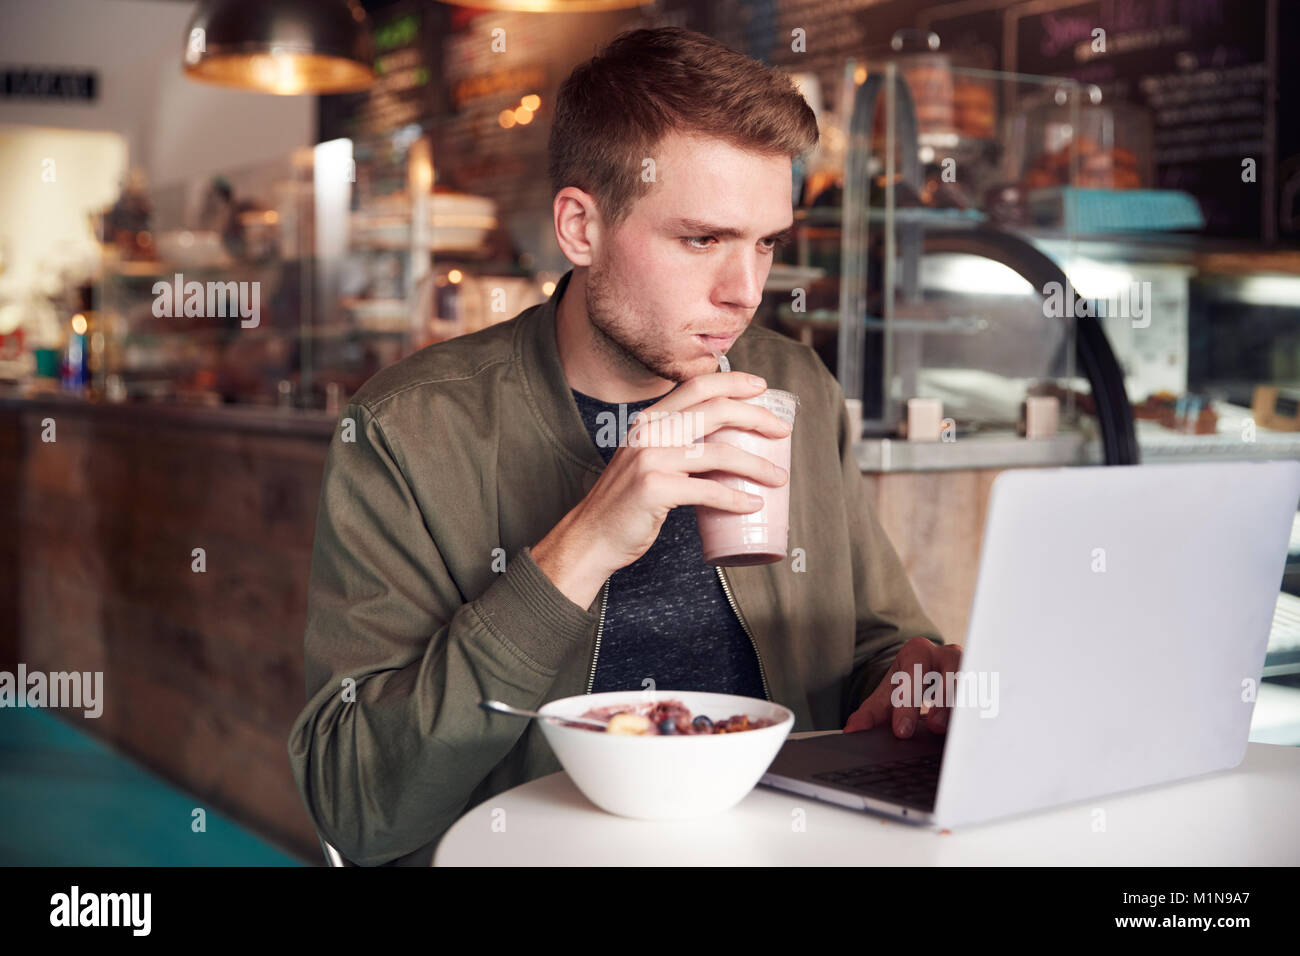 Young Man Using Laptop In Cafe Whilst Eating Breakfast Stock Photo